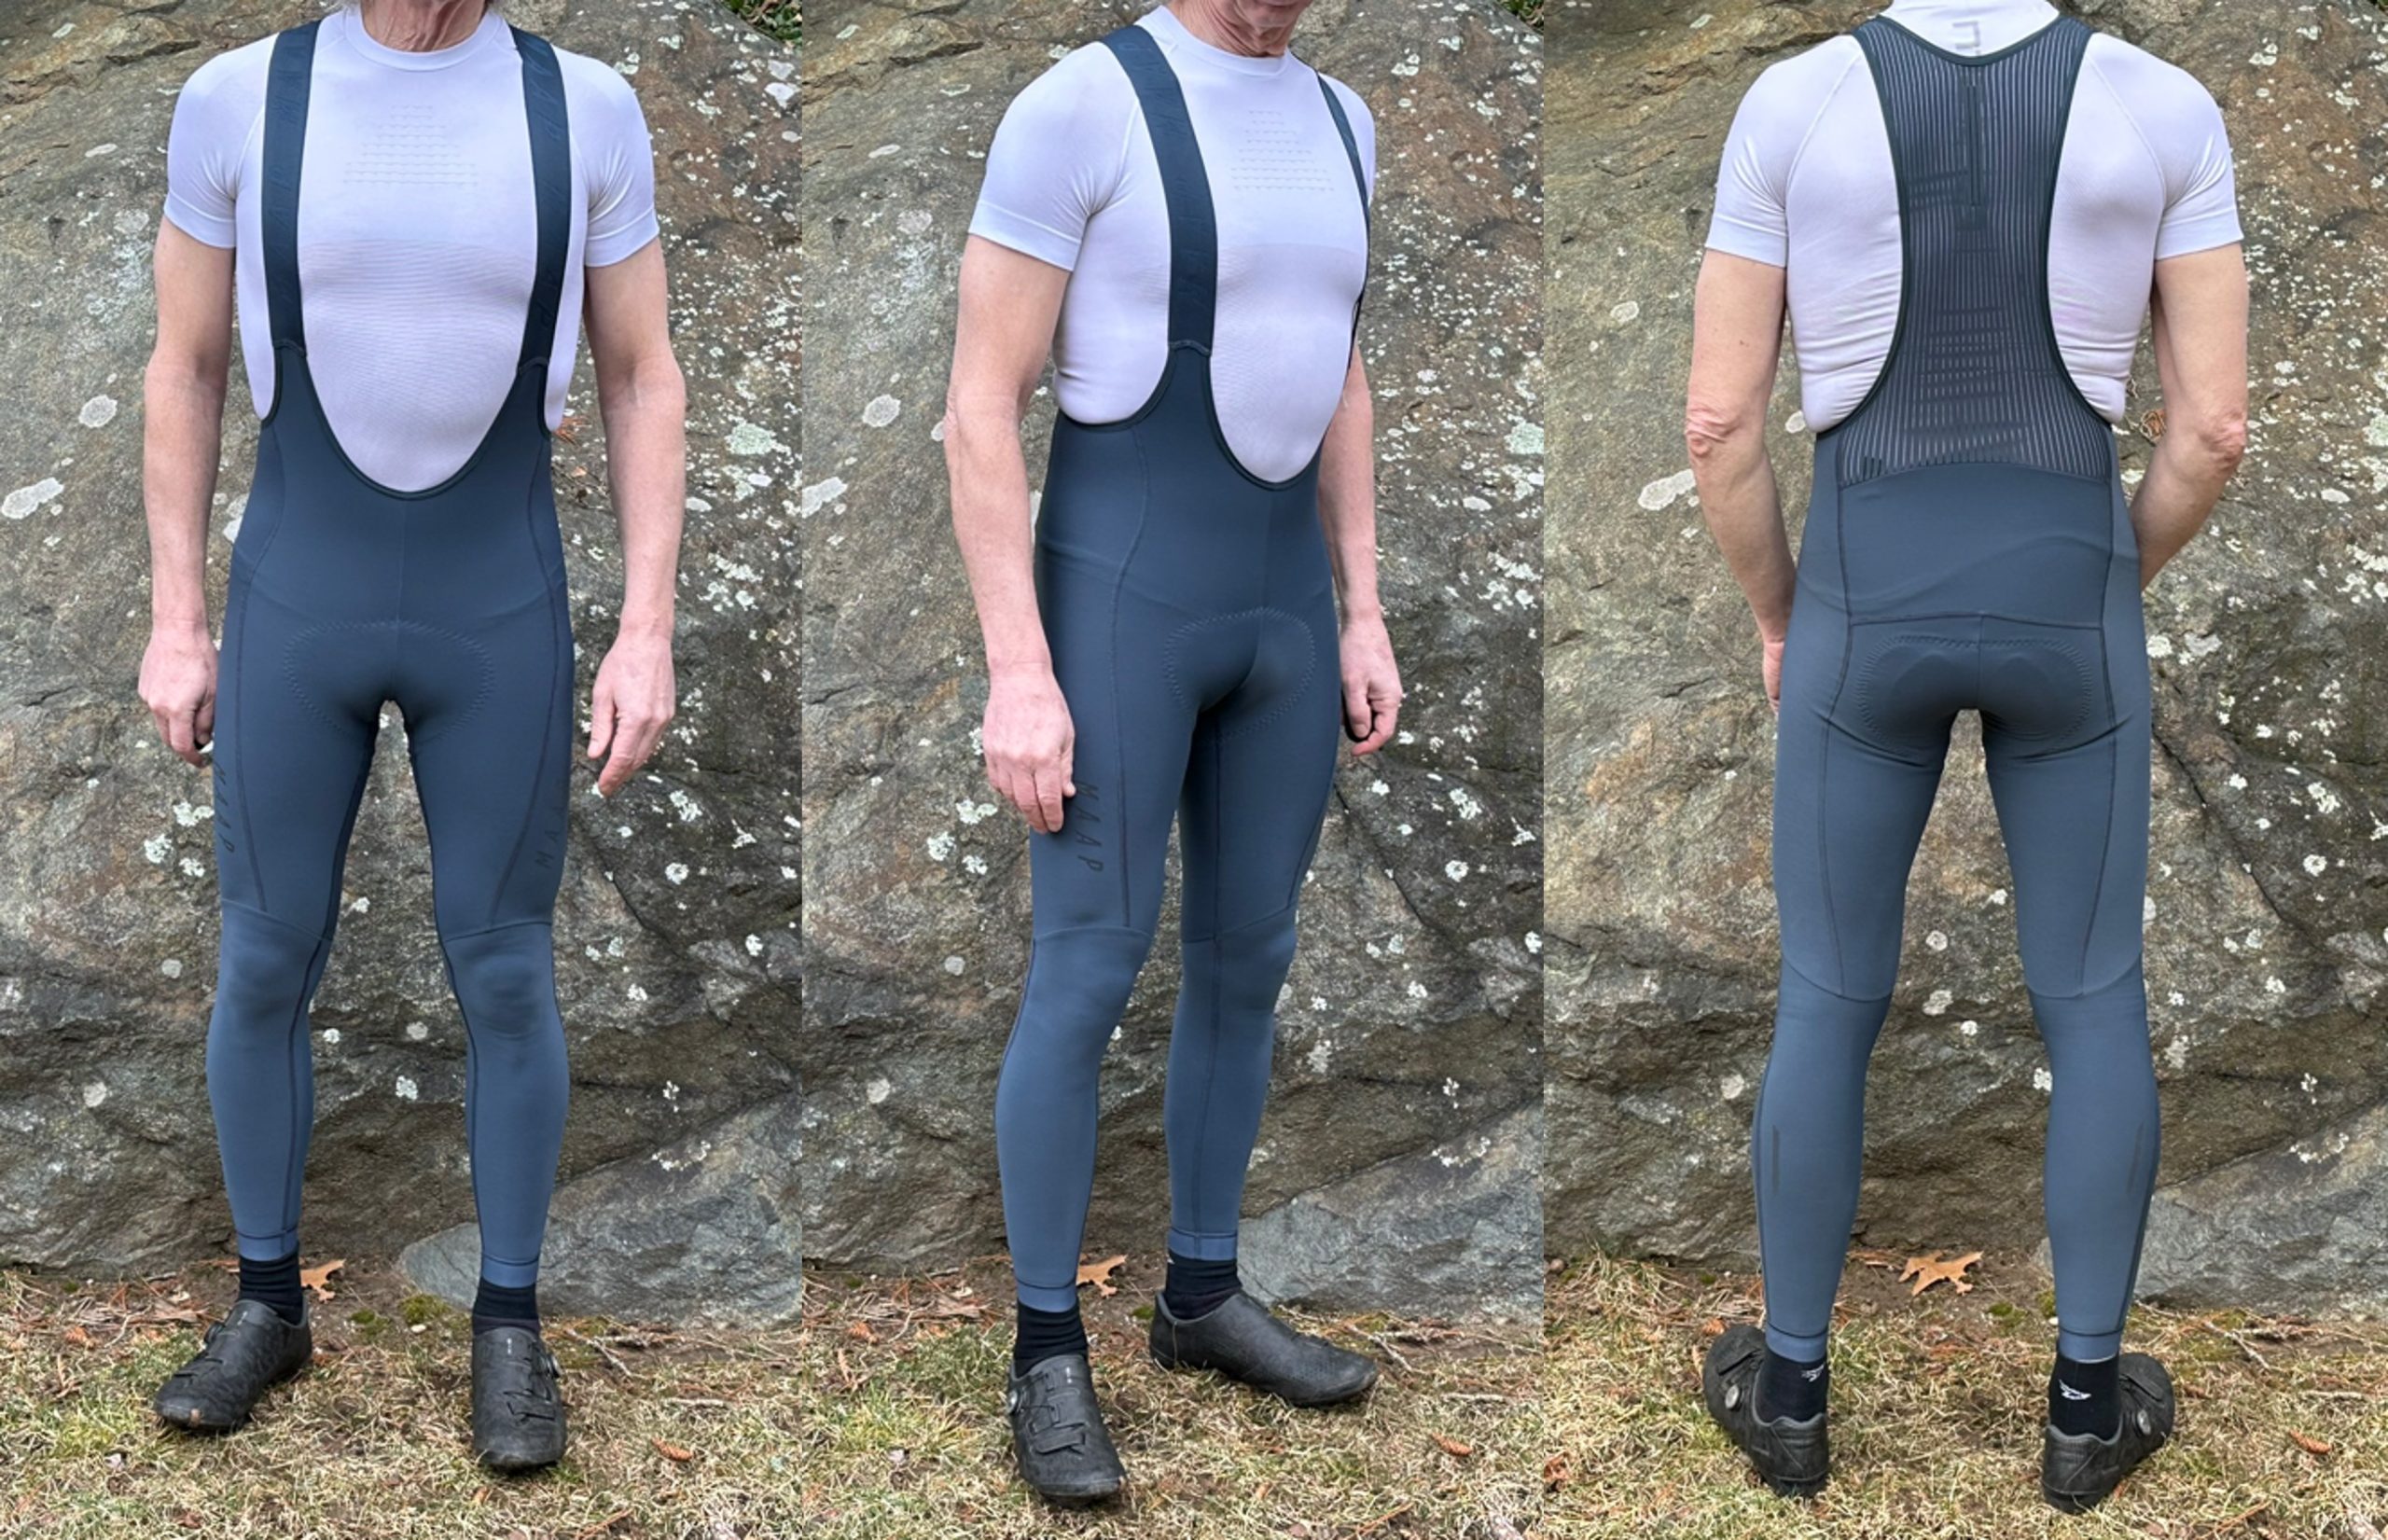 Rapha Pro Team Training tights leave us questioning why more